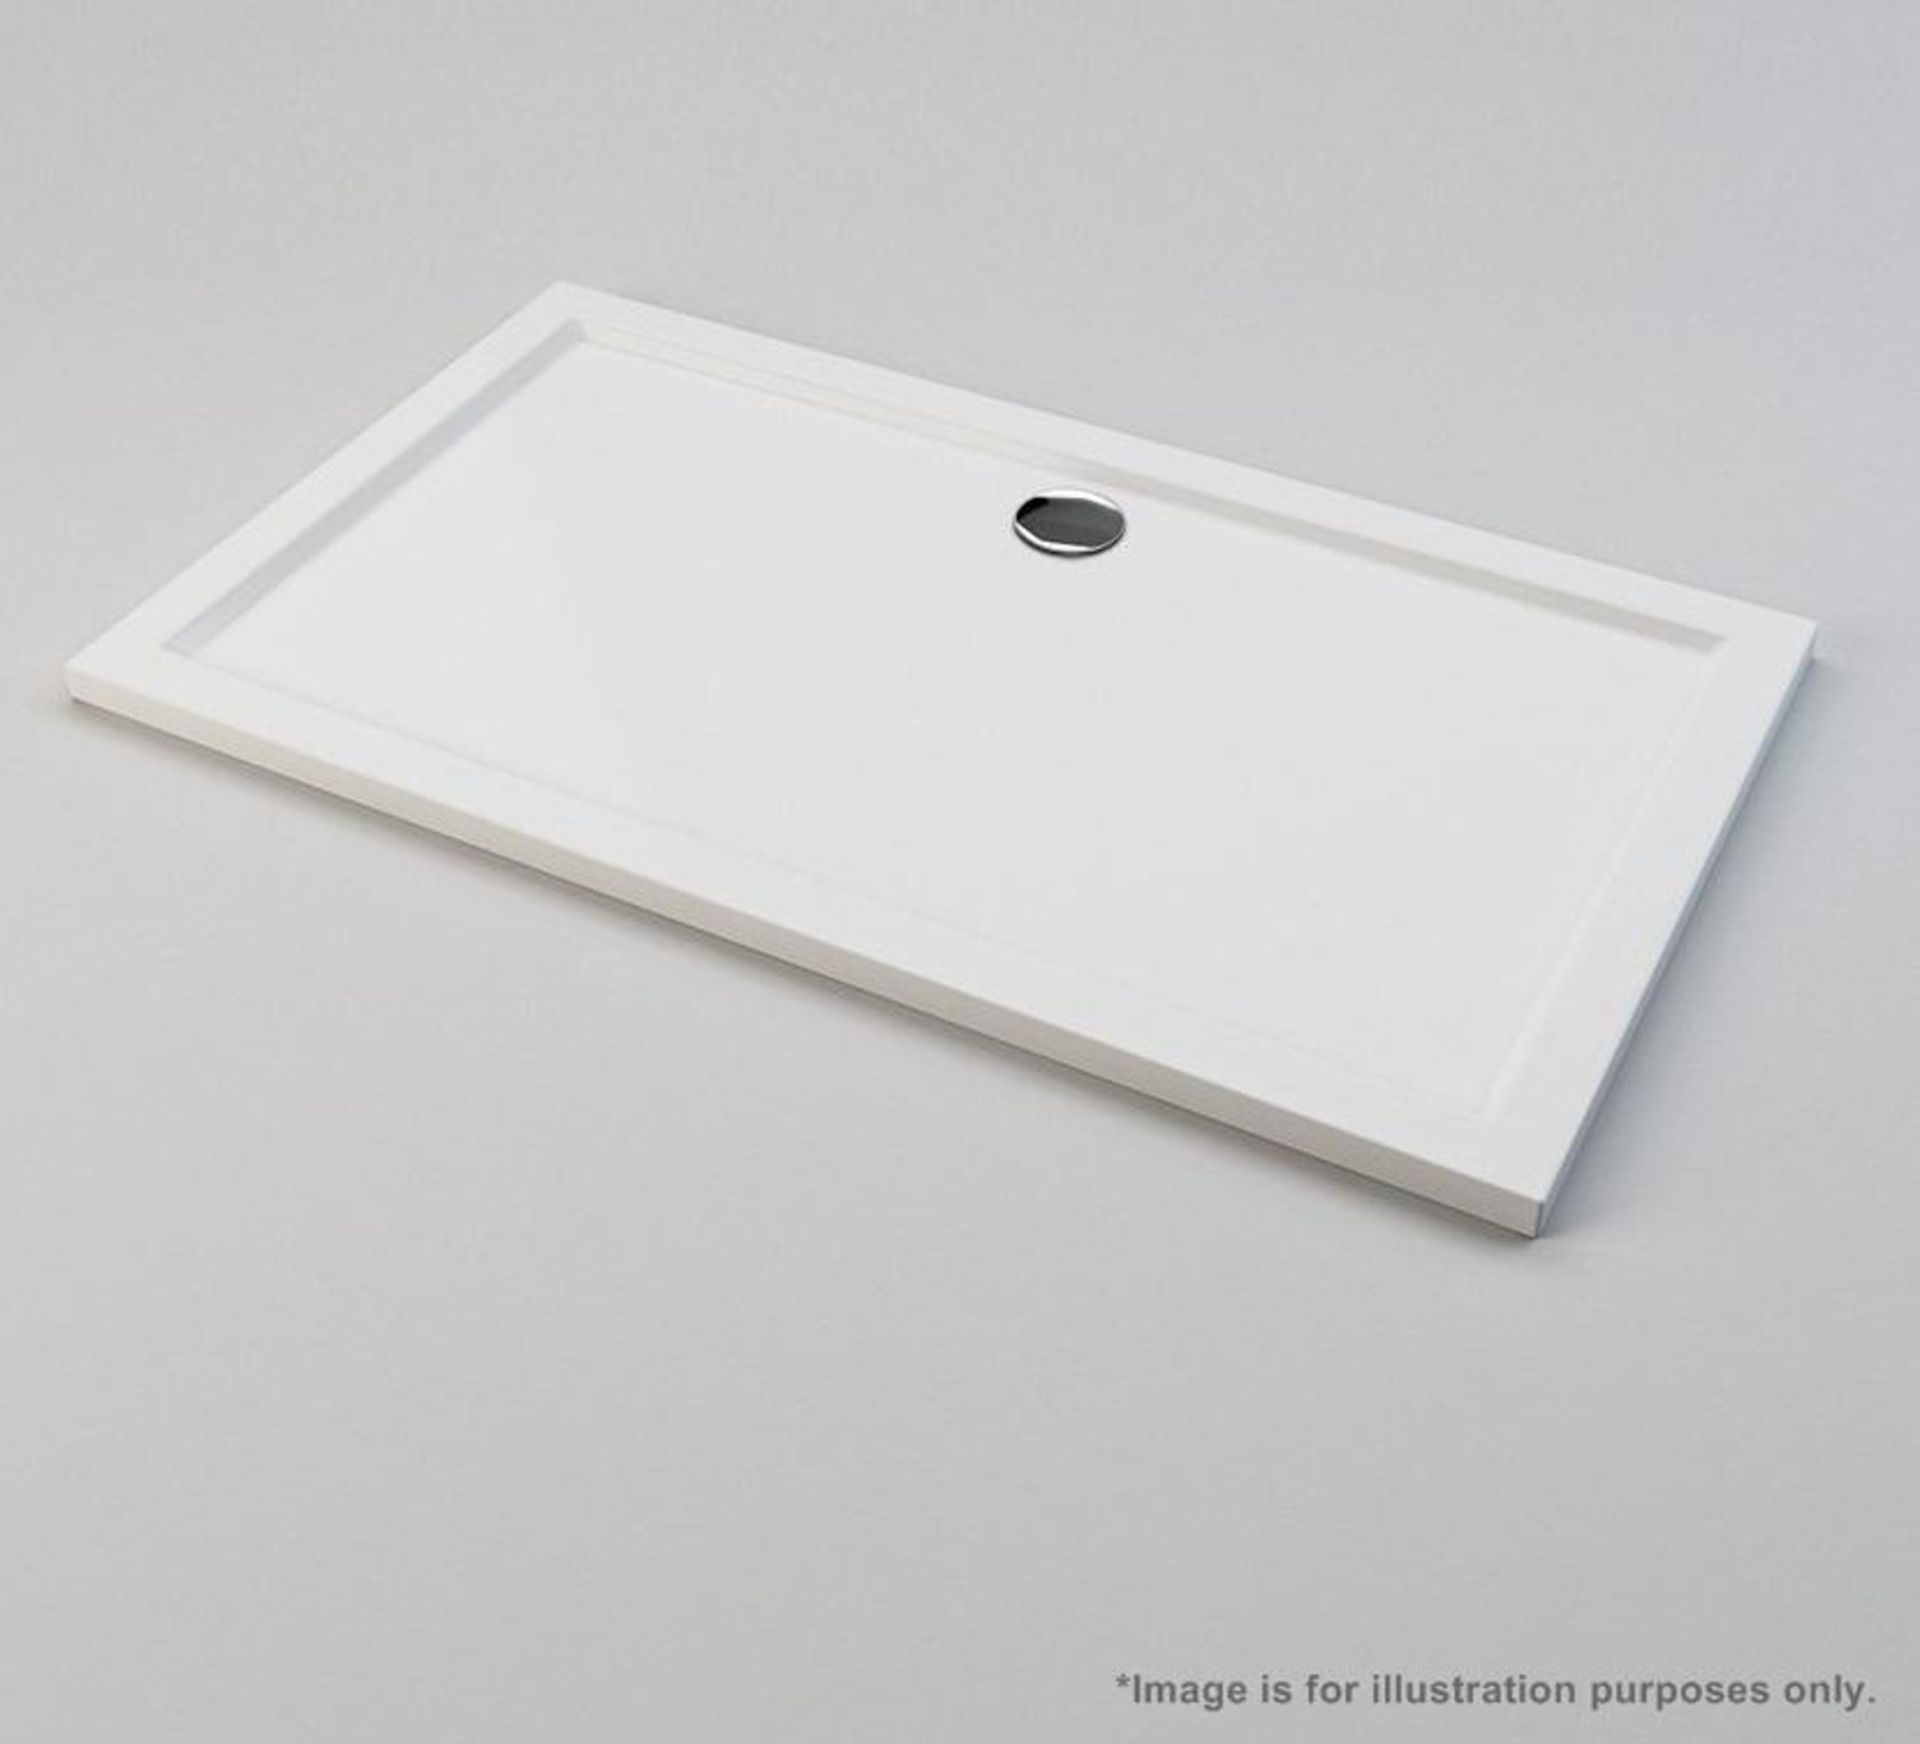 1 x Premier Pearlstone Rectangular Shower Tray 1500mm x 900mm Acrylic - New / Unused Stock - CL269 - - Image 2 of 4